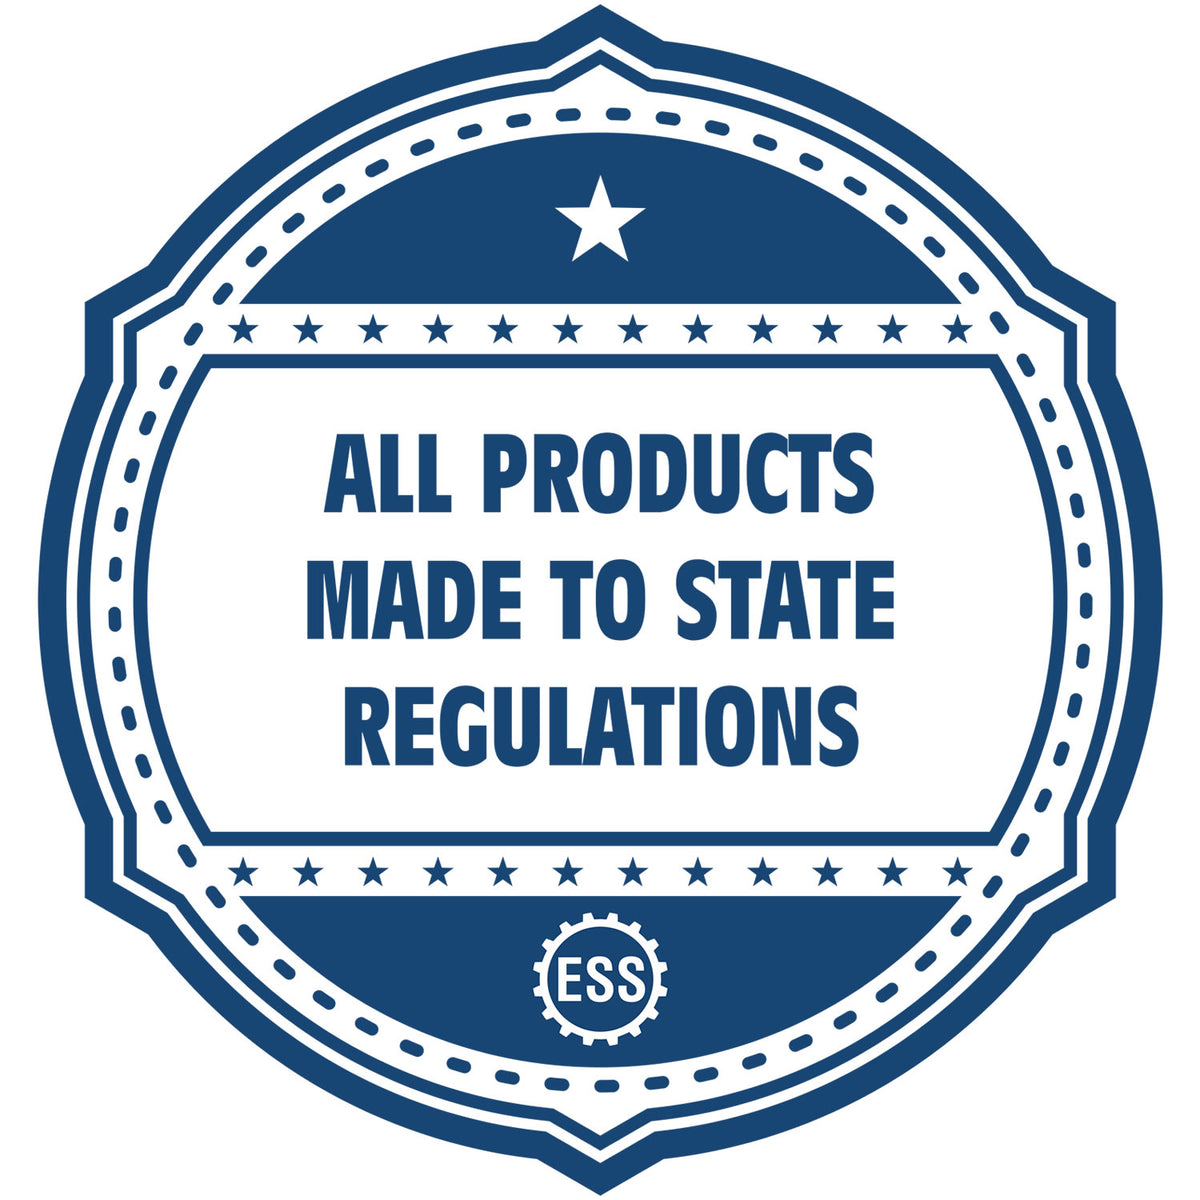 A blue icon or badge for the Gift California Engineer Seal showing that this product is made in compliance with state regulations.